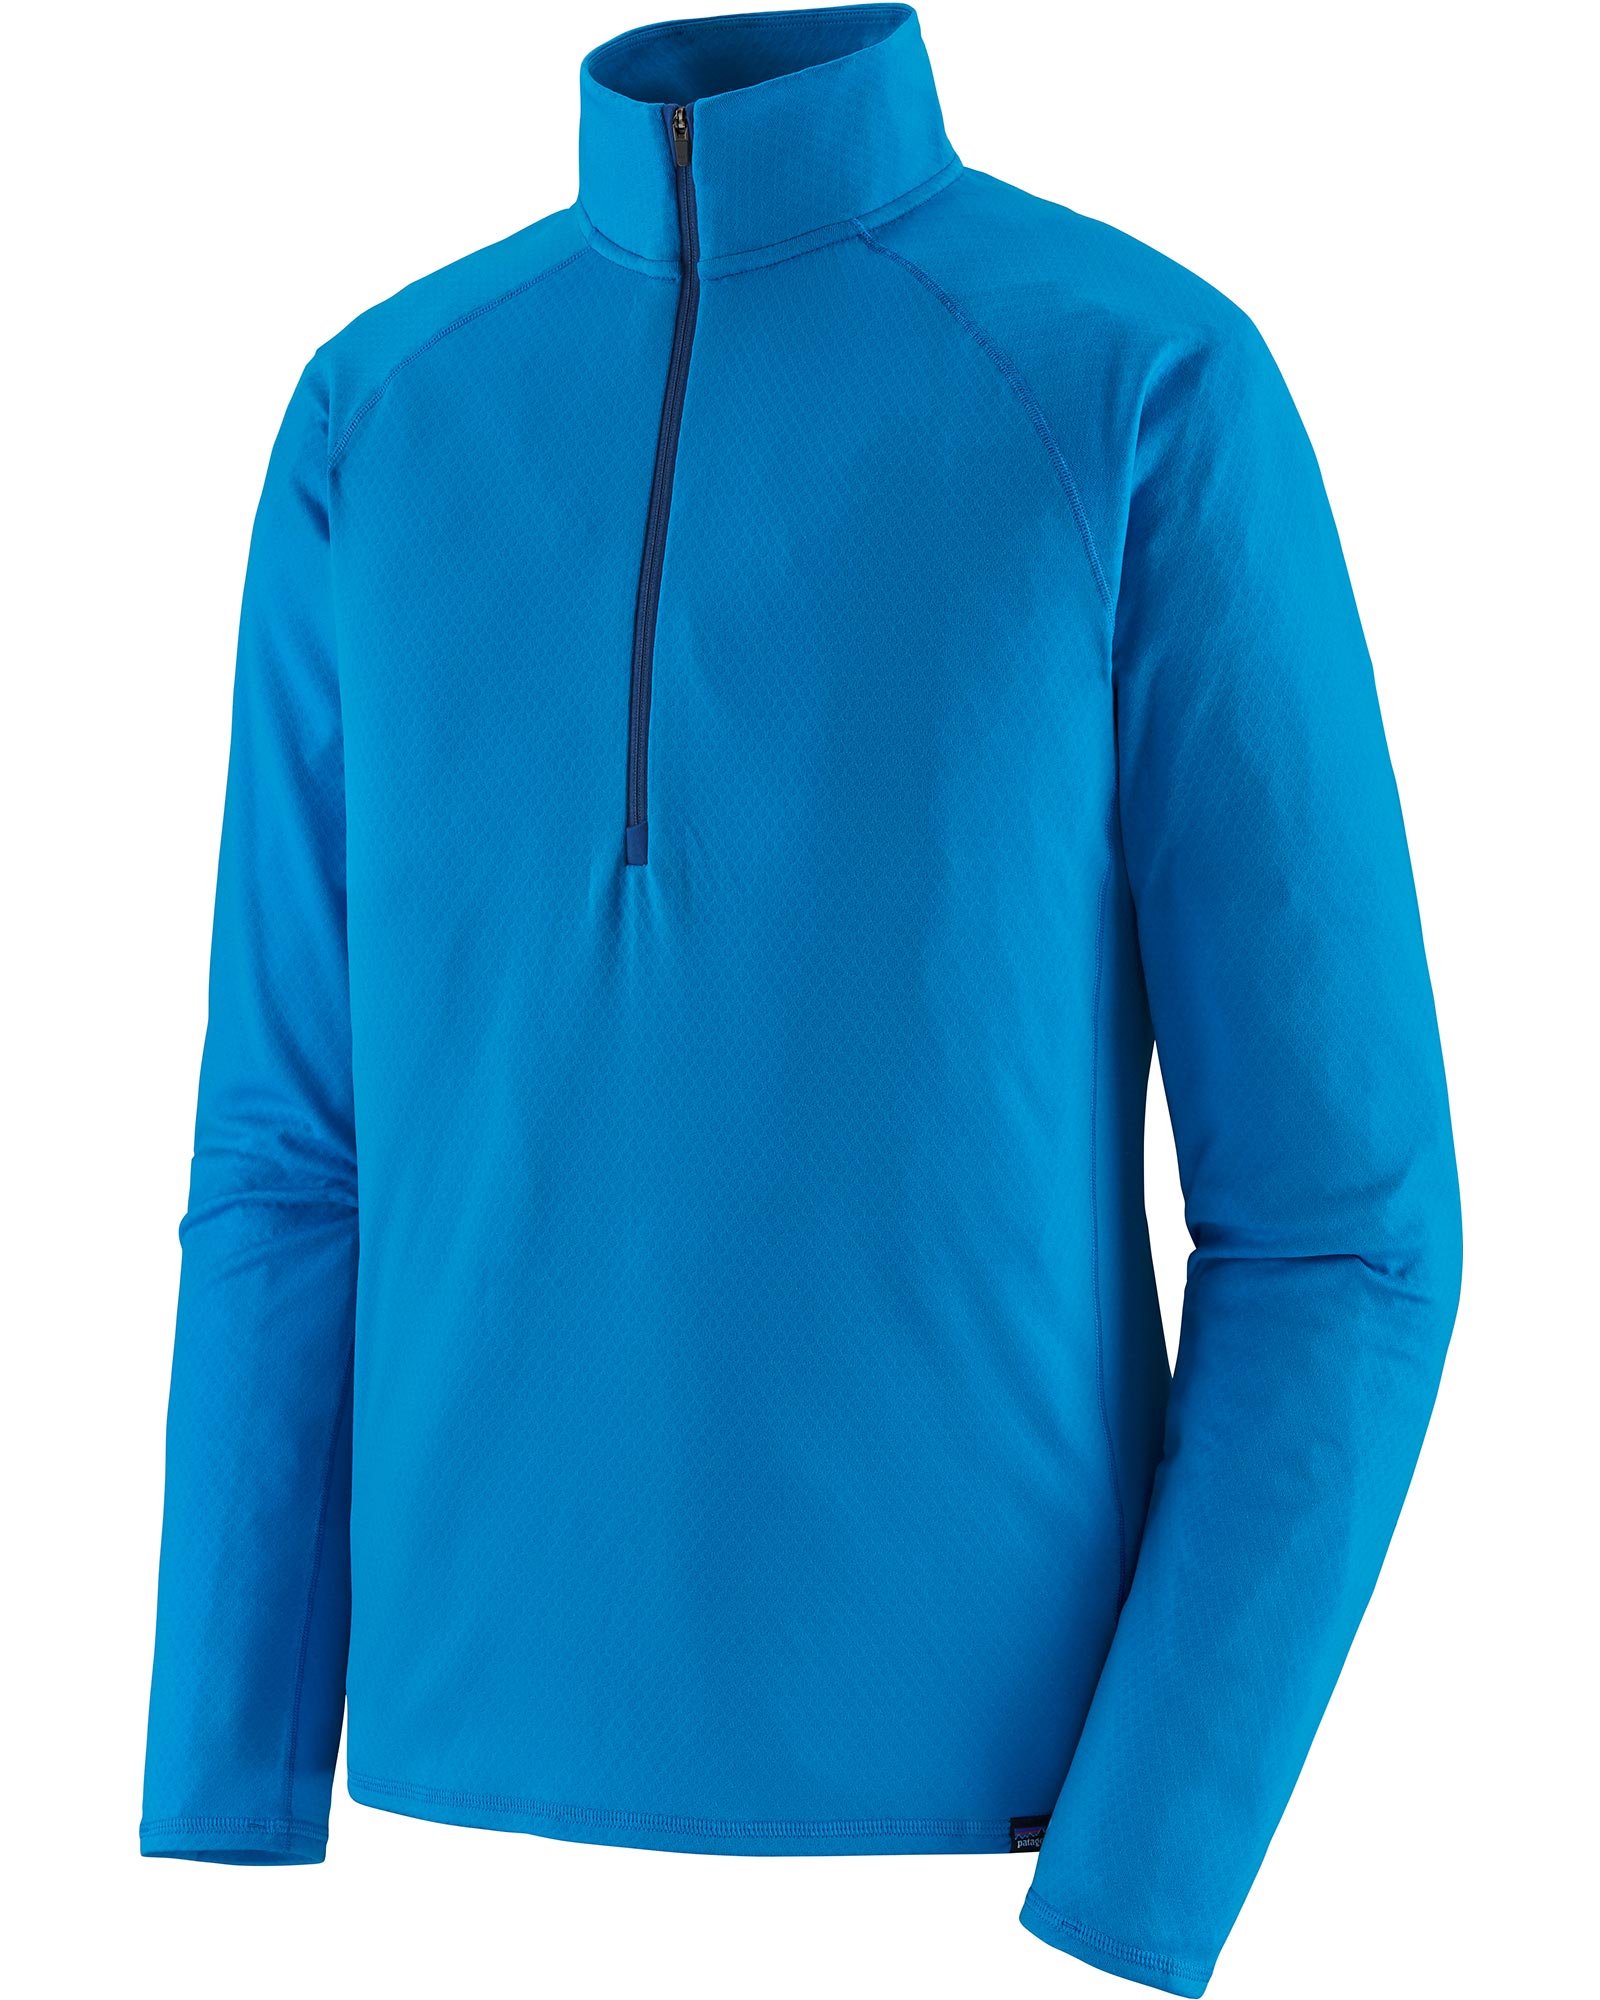 Patagonia Capilene Men’s Midweight Zip Neck - Andes Blue S